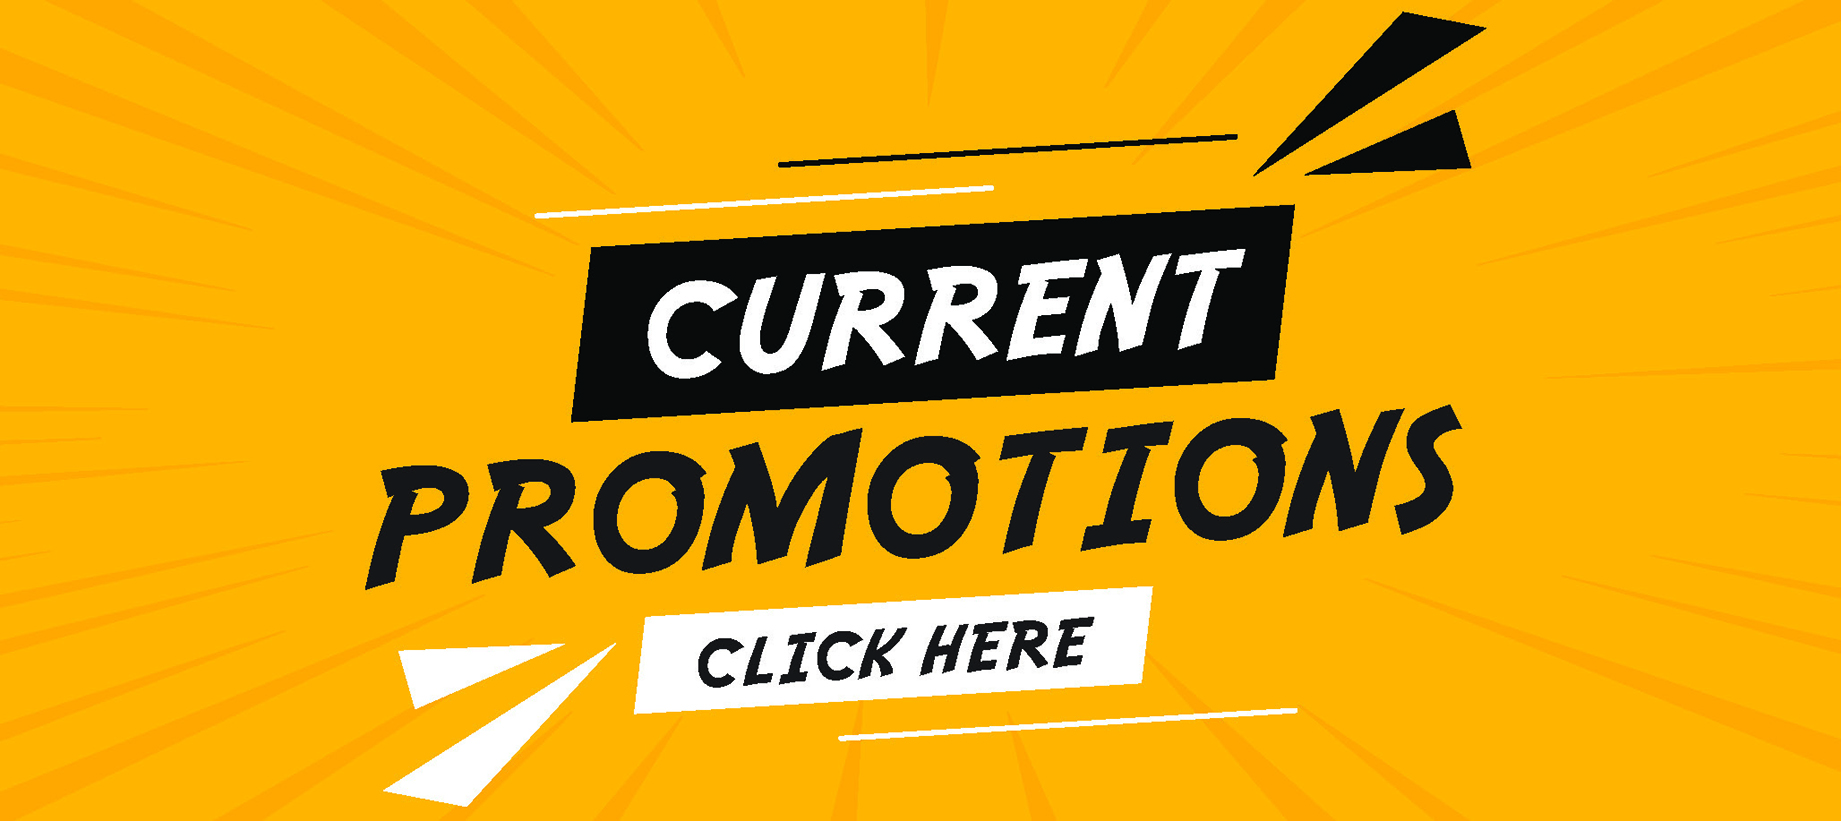 Click here to view our current promotions!